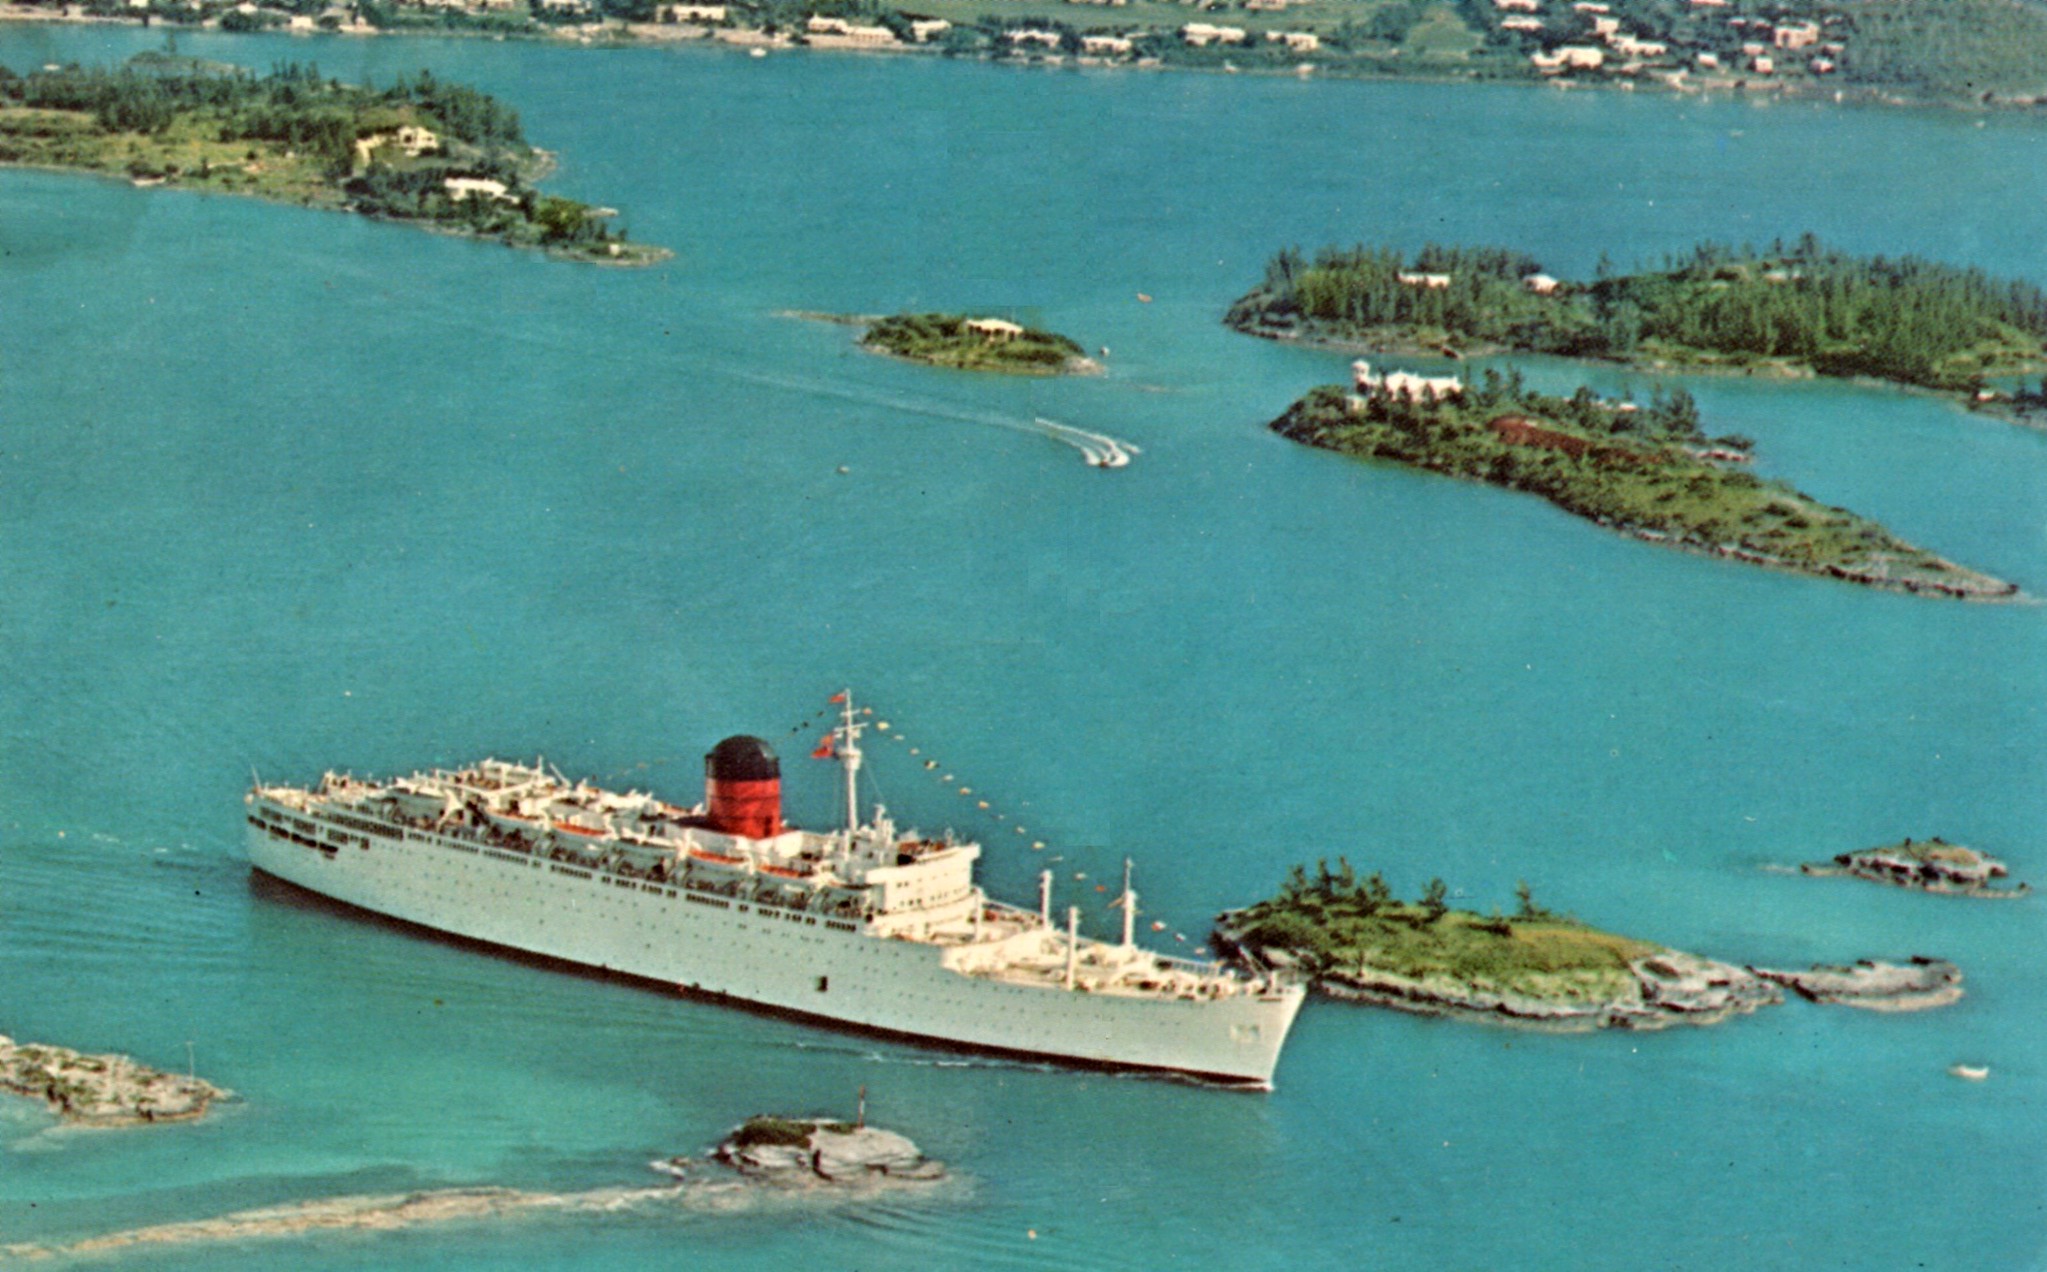 A white ship with a red and black funnel sails past small green islands.